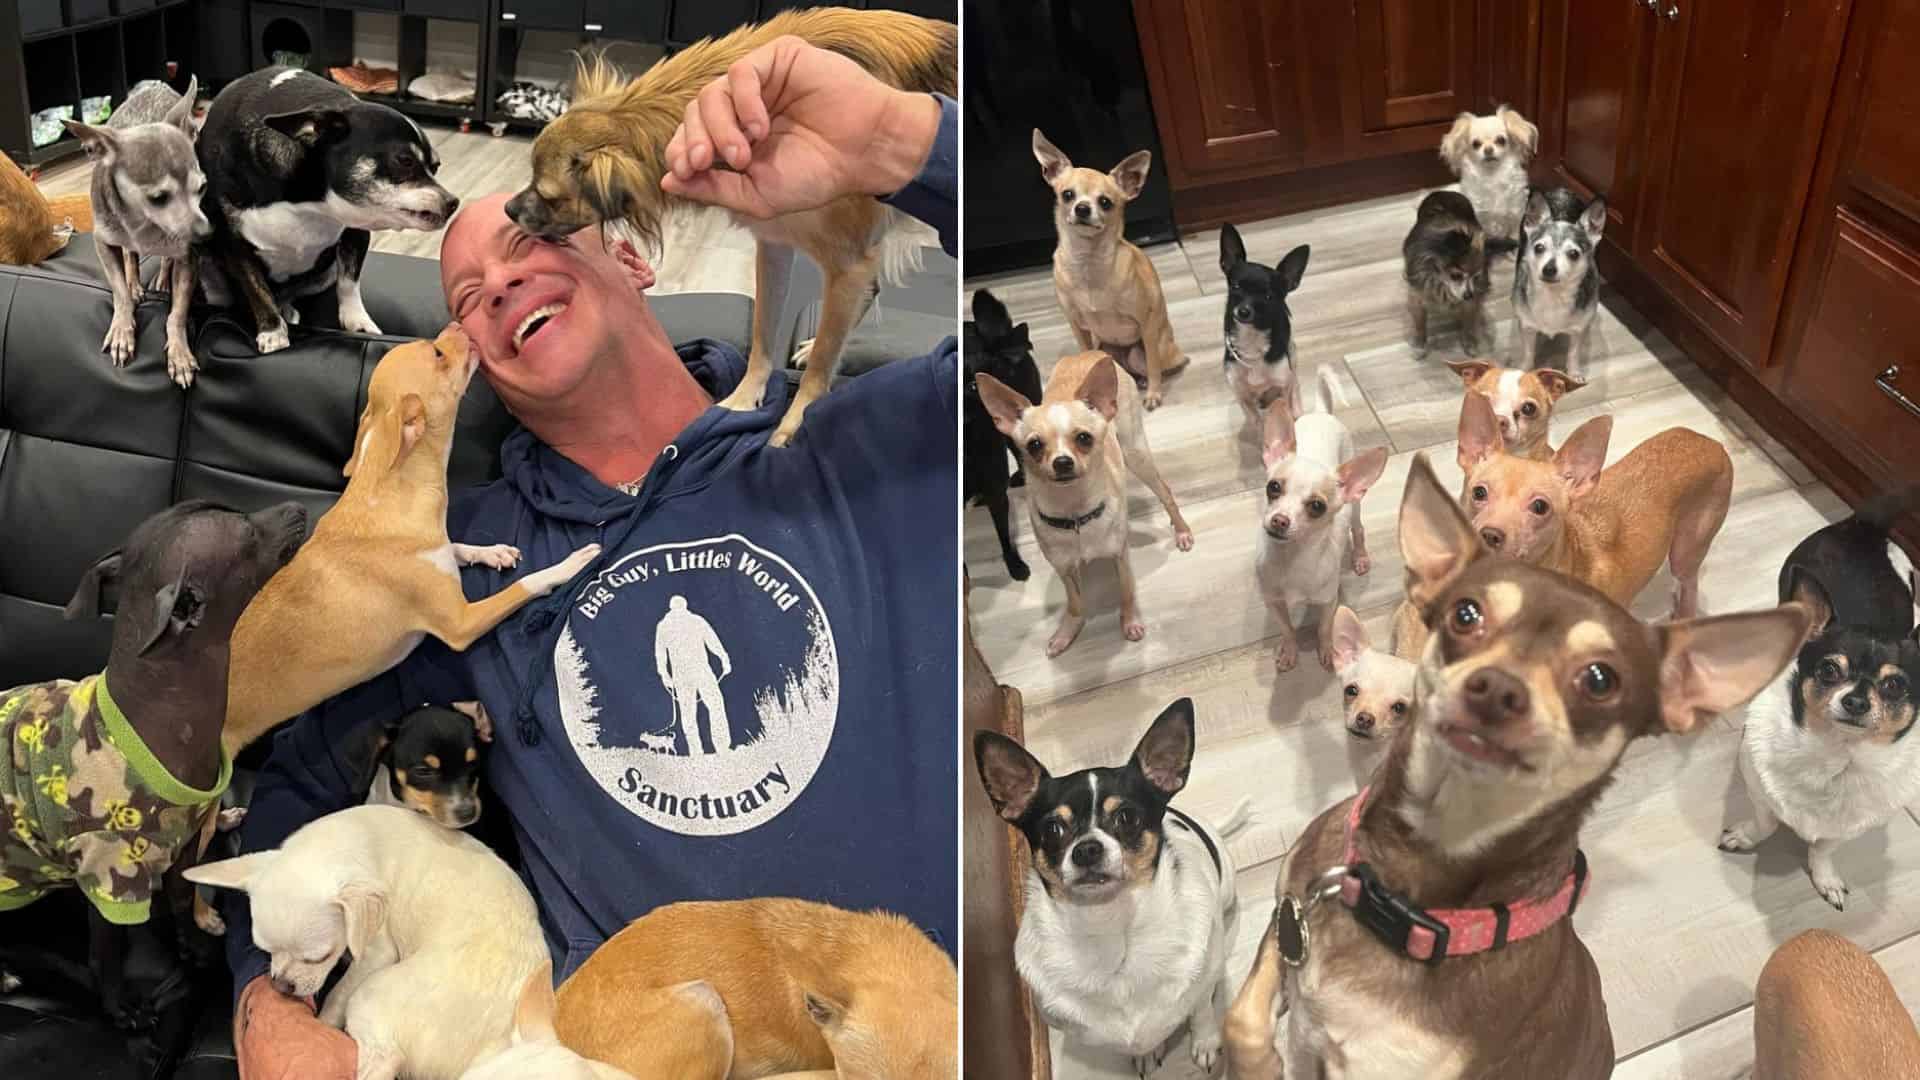 Man Who Used To Make Fun Of Toy Dogs Dedicates His Life To Rescuing Them